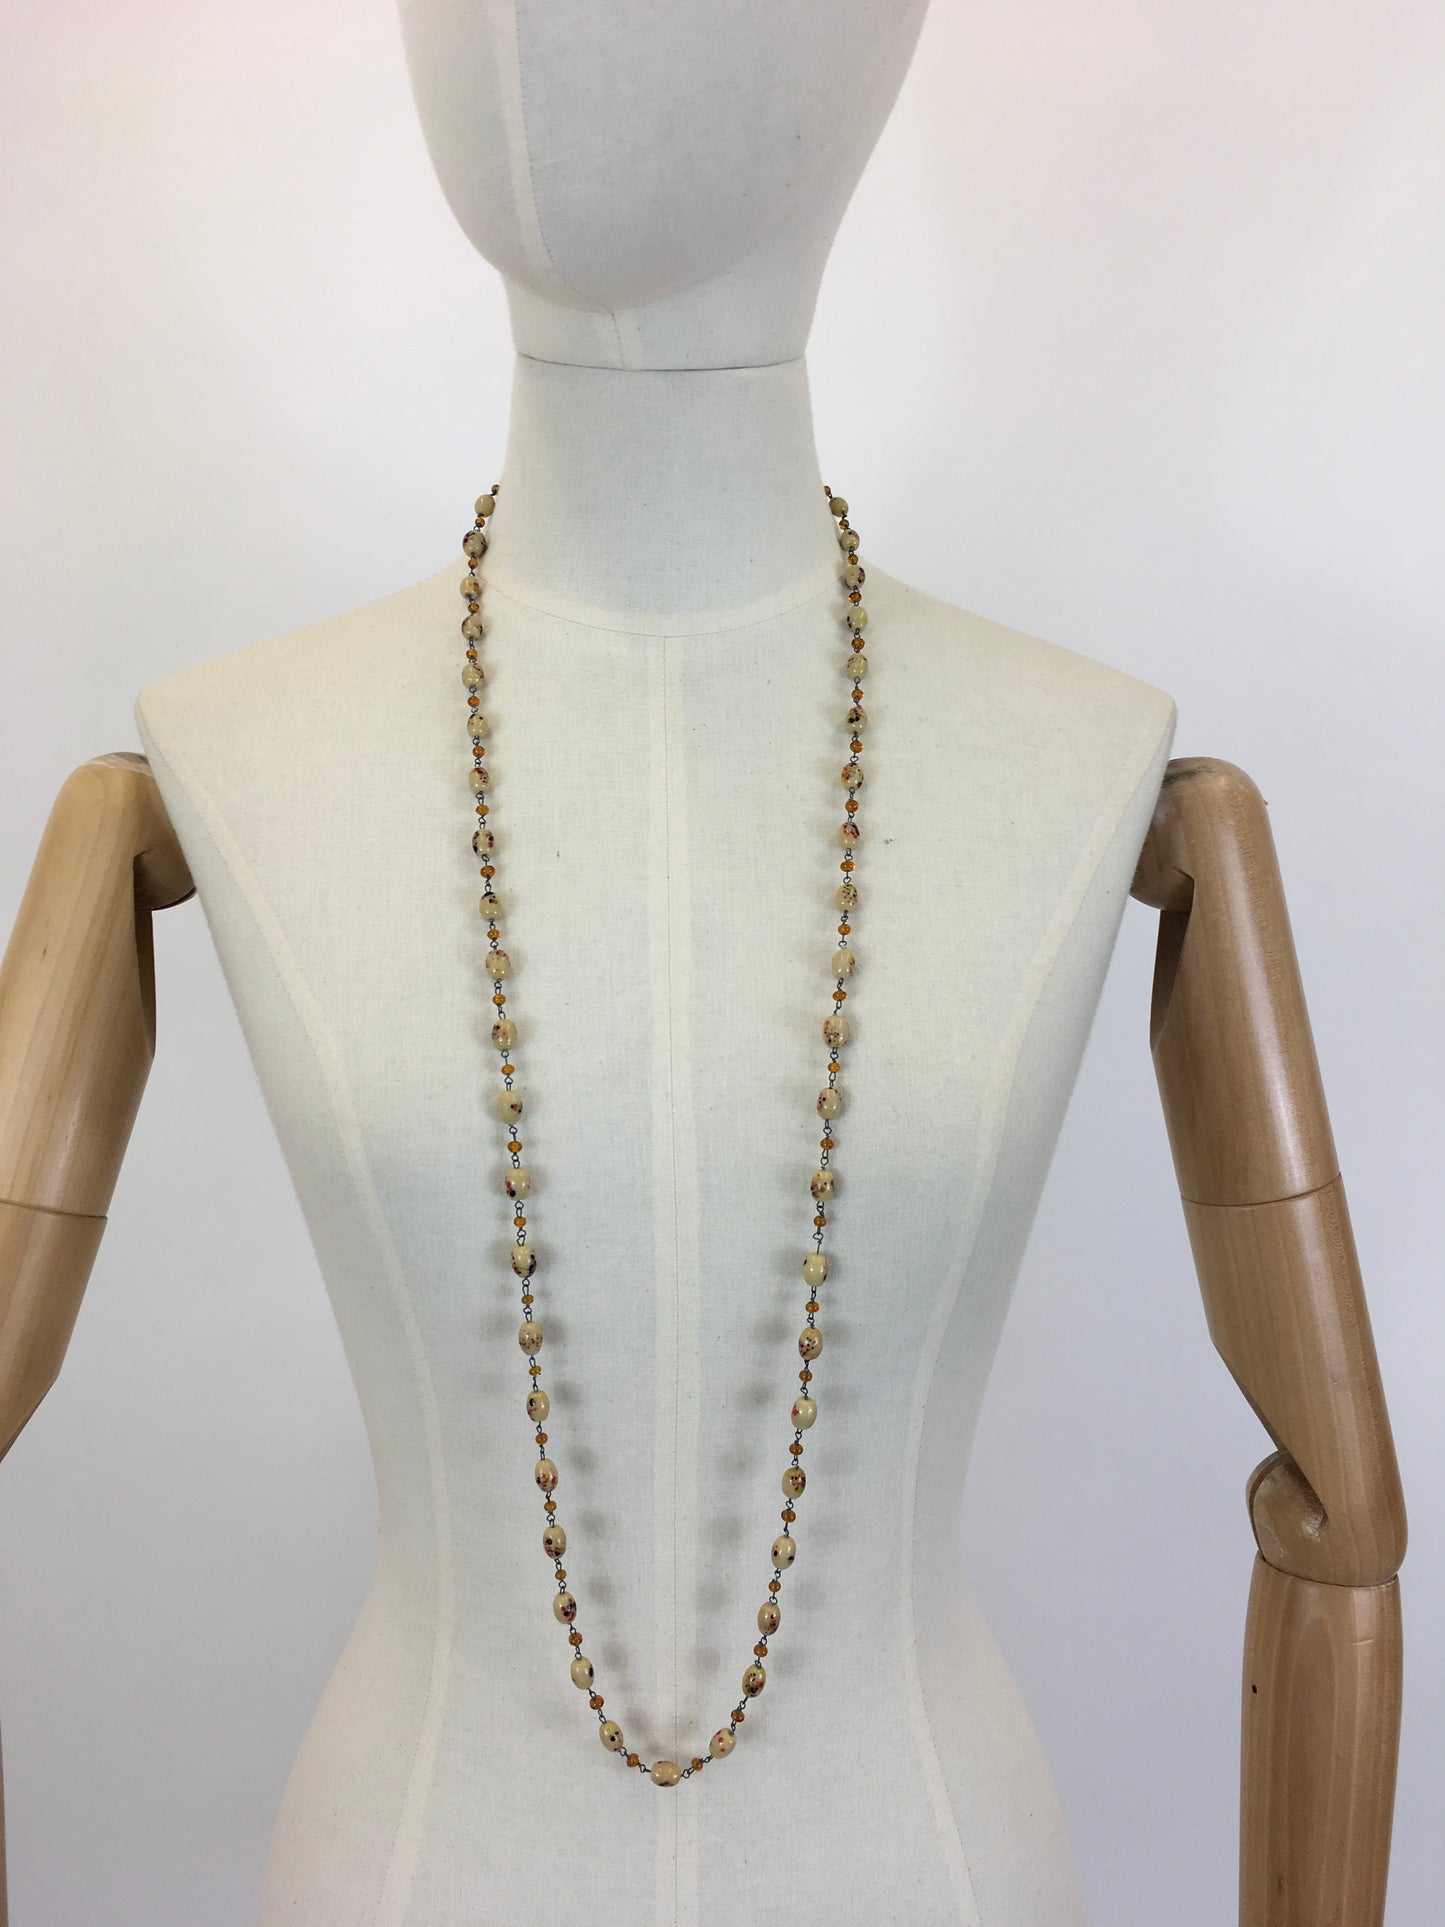 Original 1930’s Beautiful Glass Beaded Necklace - In Shades of Cream, Amber & Black Deco Beads